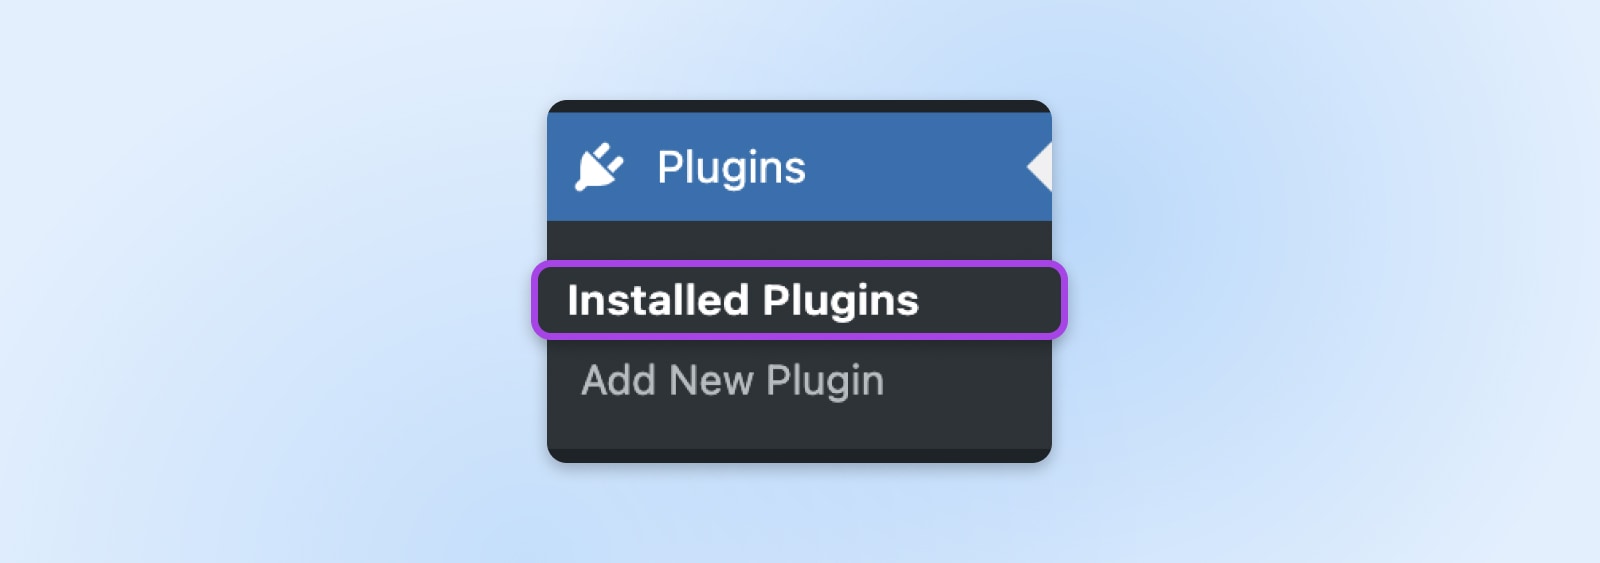 'Plugins' drop-down menu with 'Installed Plugins' selected and an option to 'Add New Plugin.'